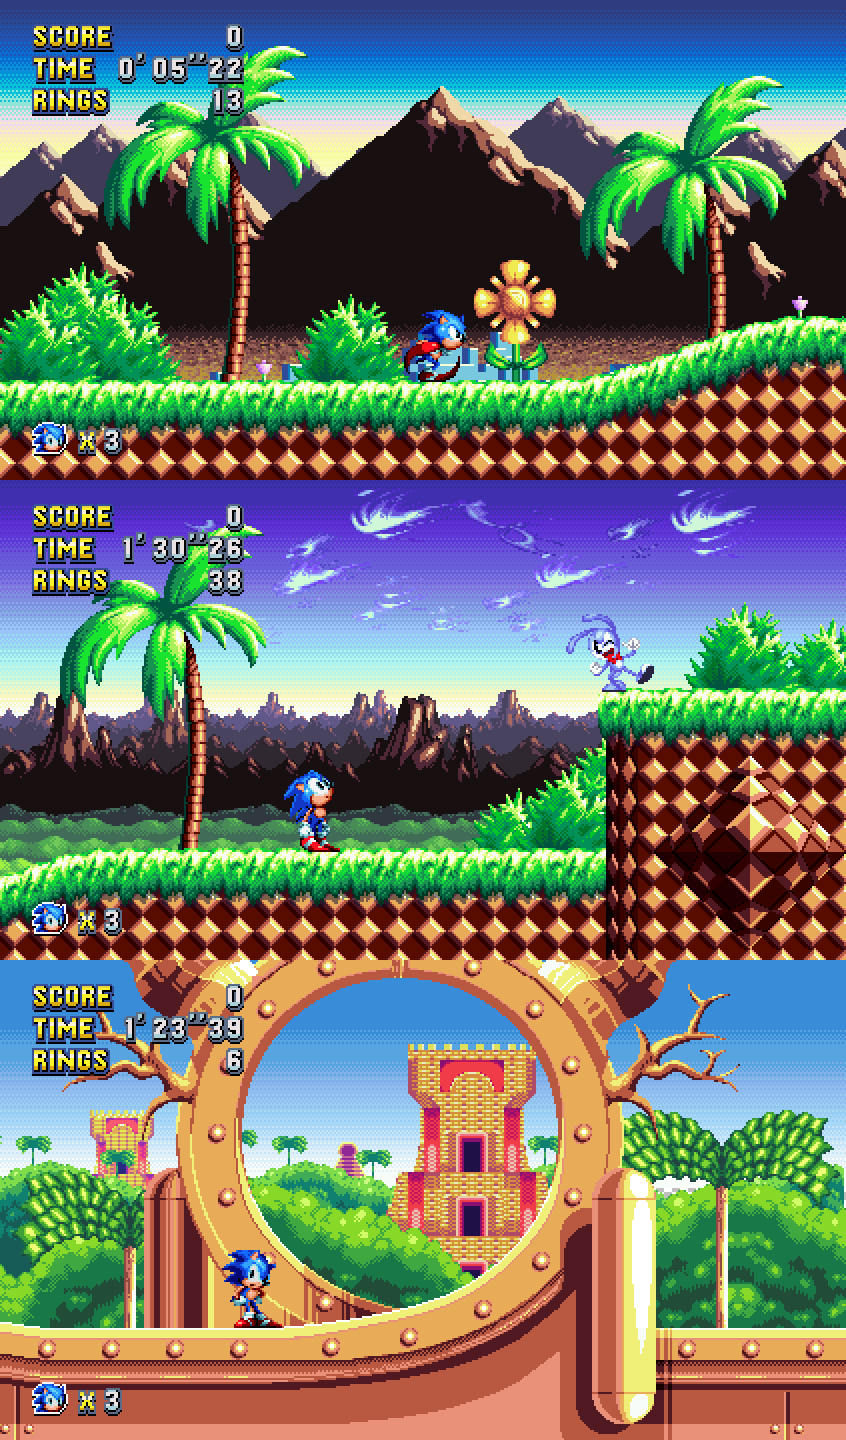 Sonic Mania Background Sprites - Sonic Mania - Green Hill Zone ...